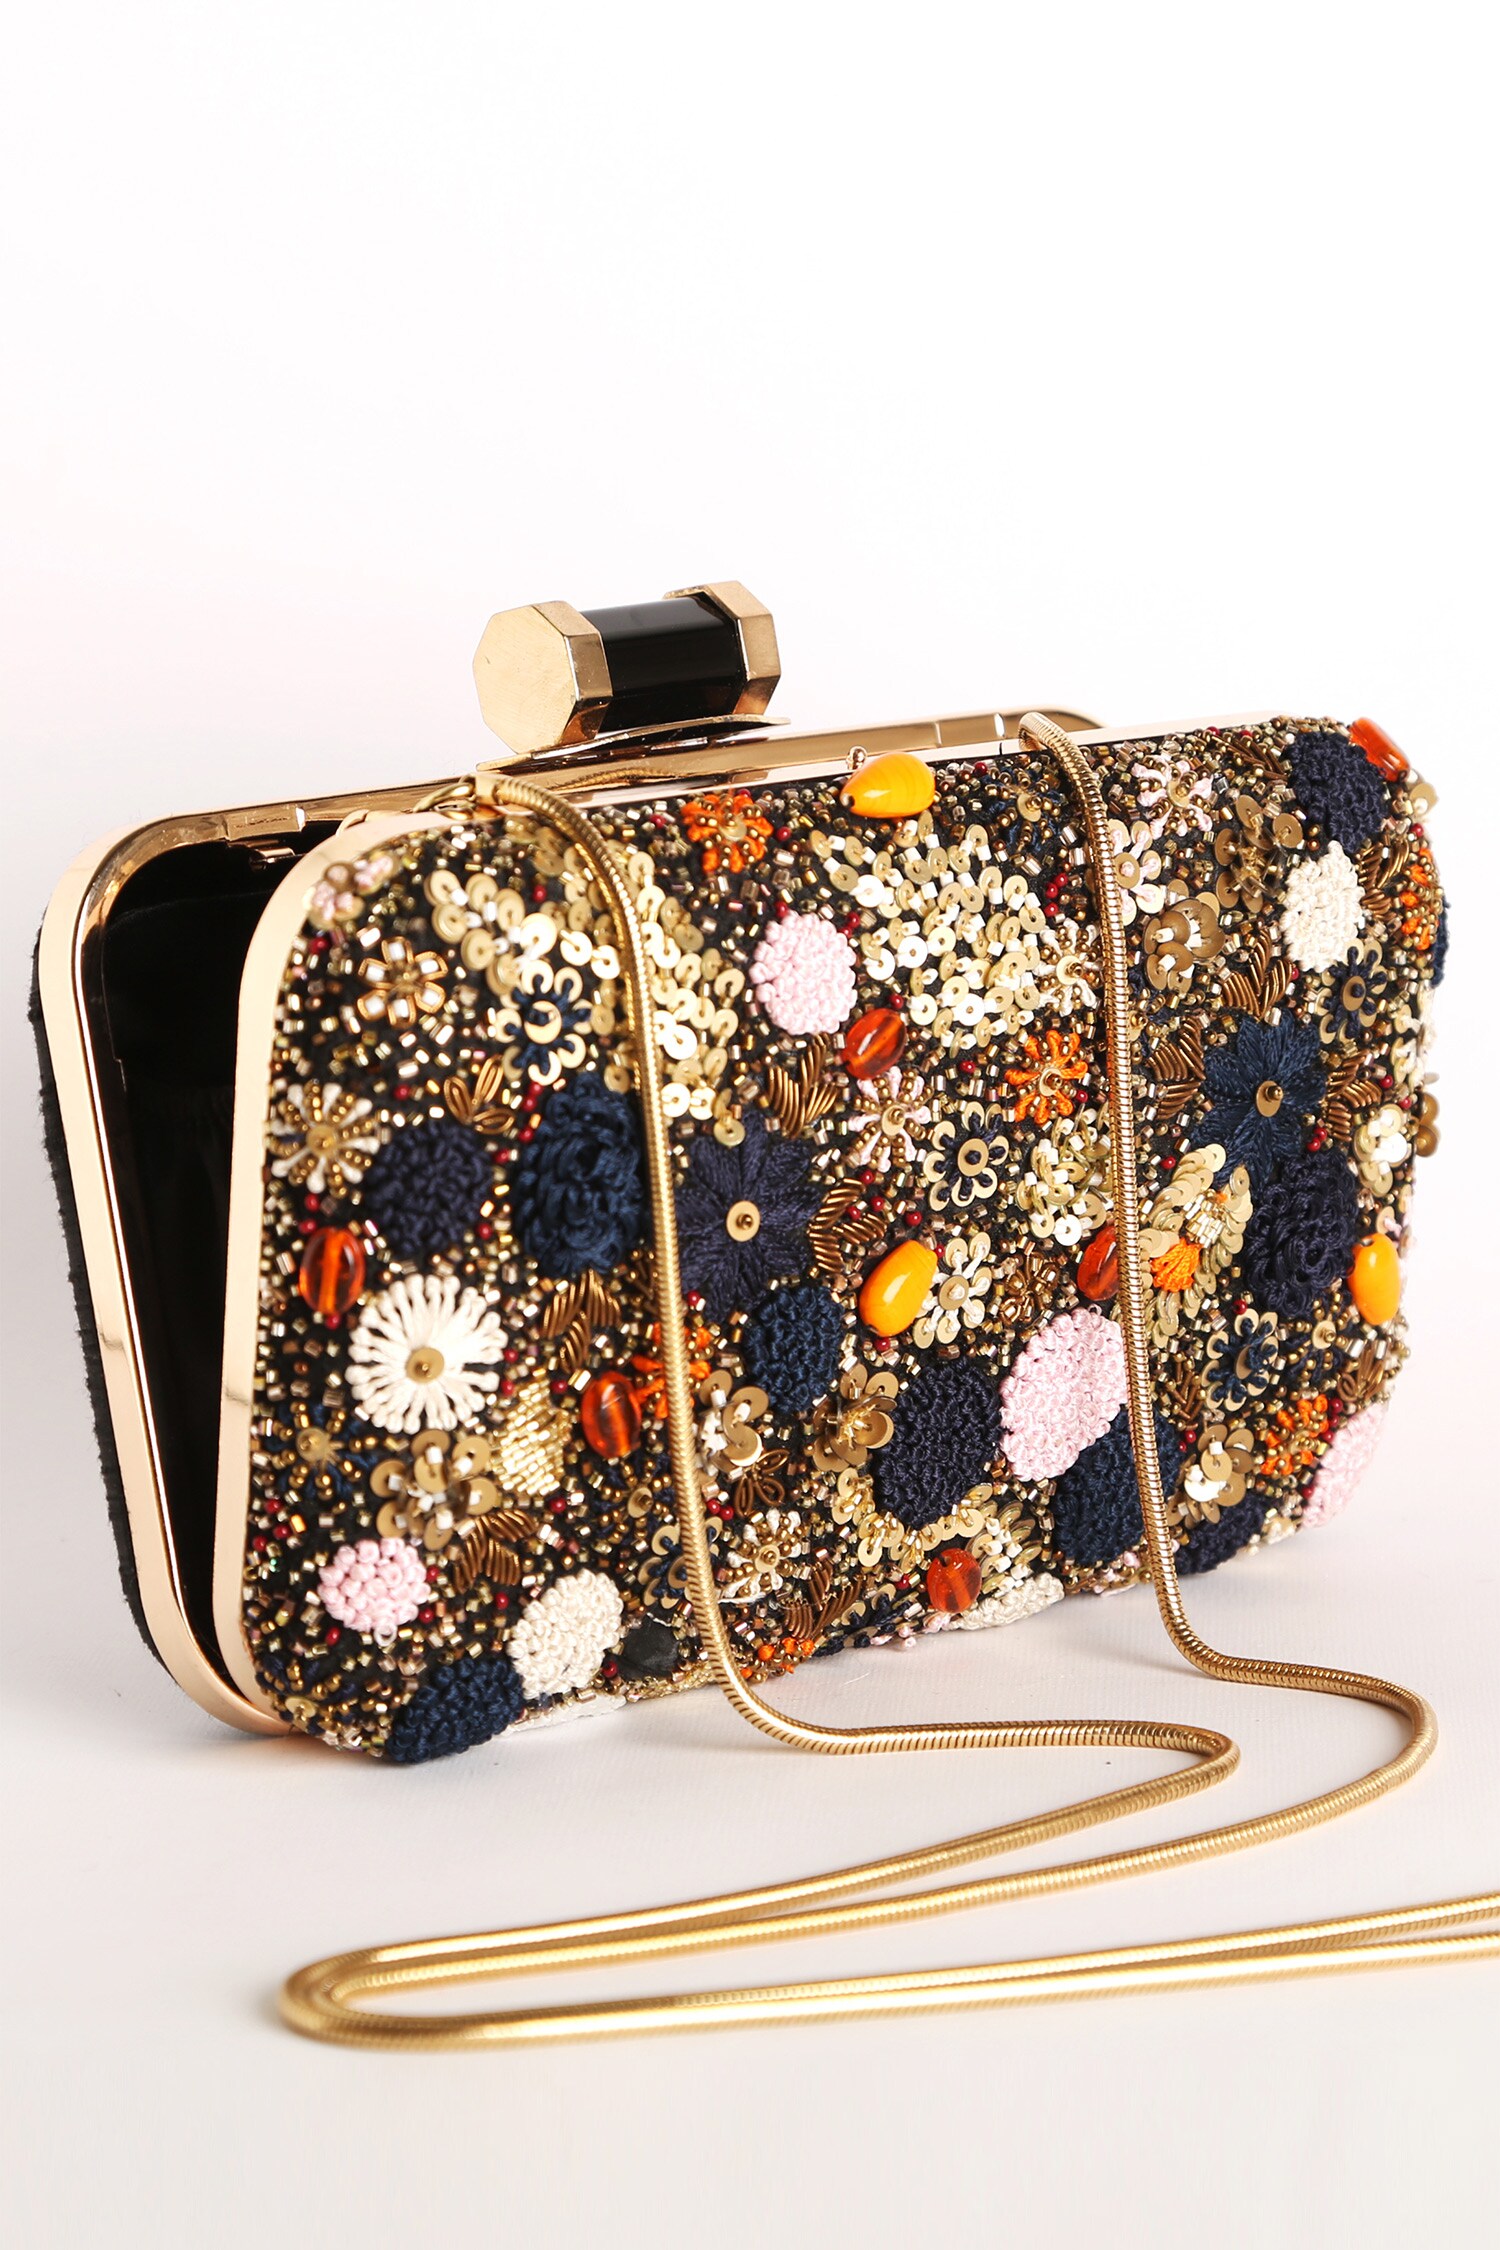 Buy Embroidered Clutch by Ara Studio at Aza Fashions